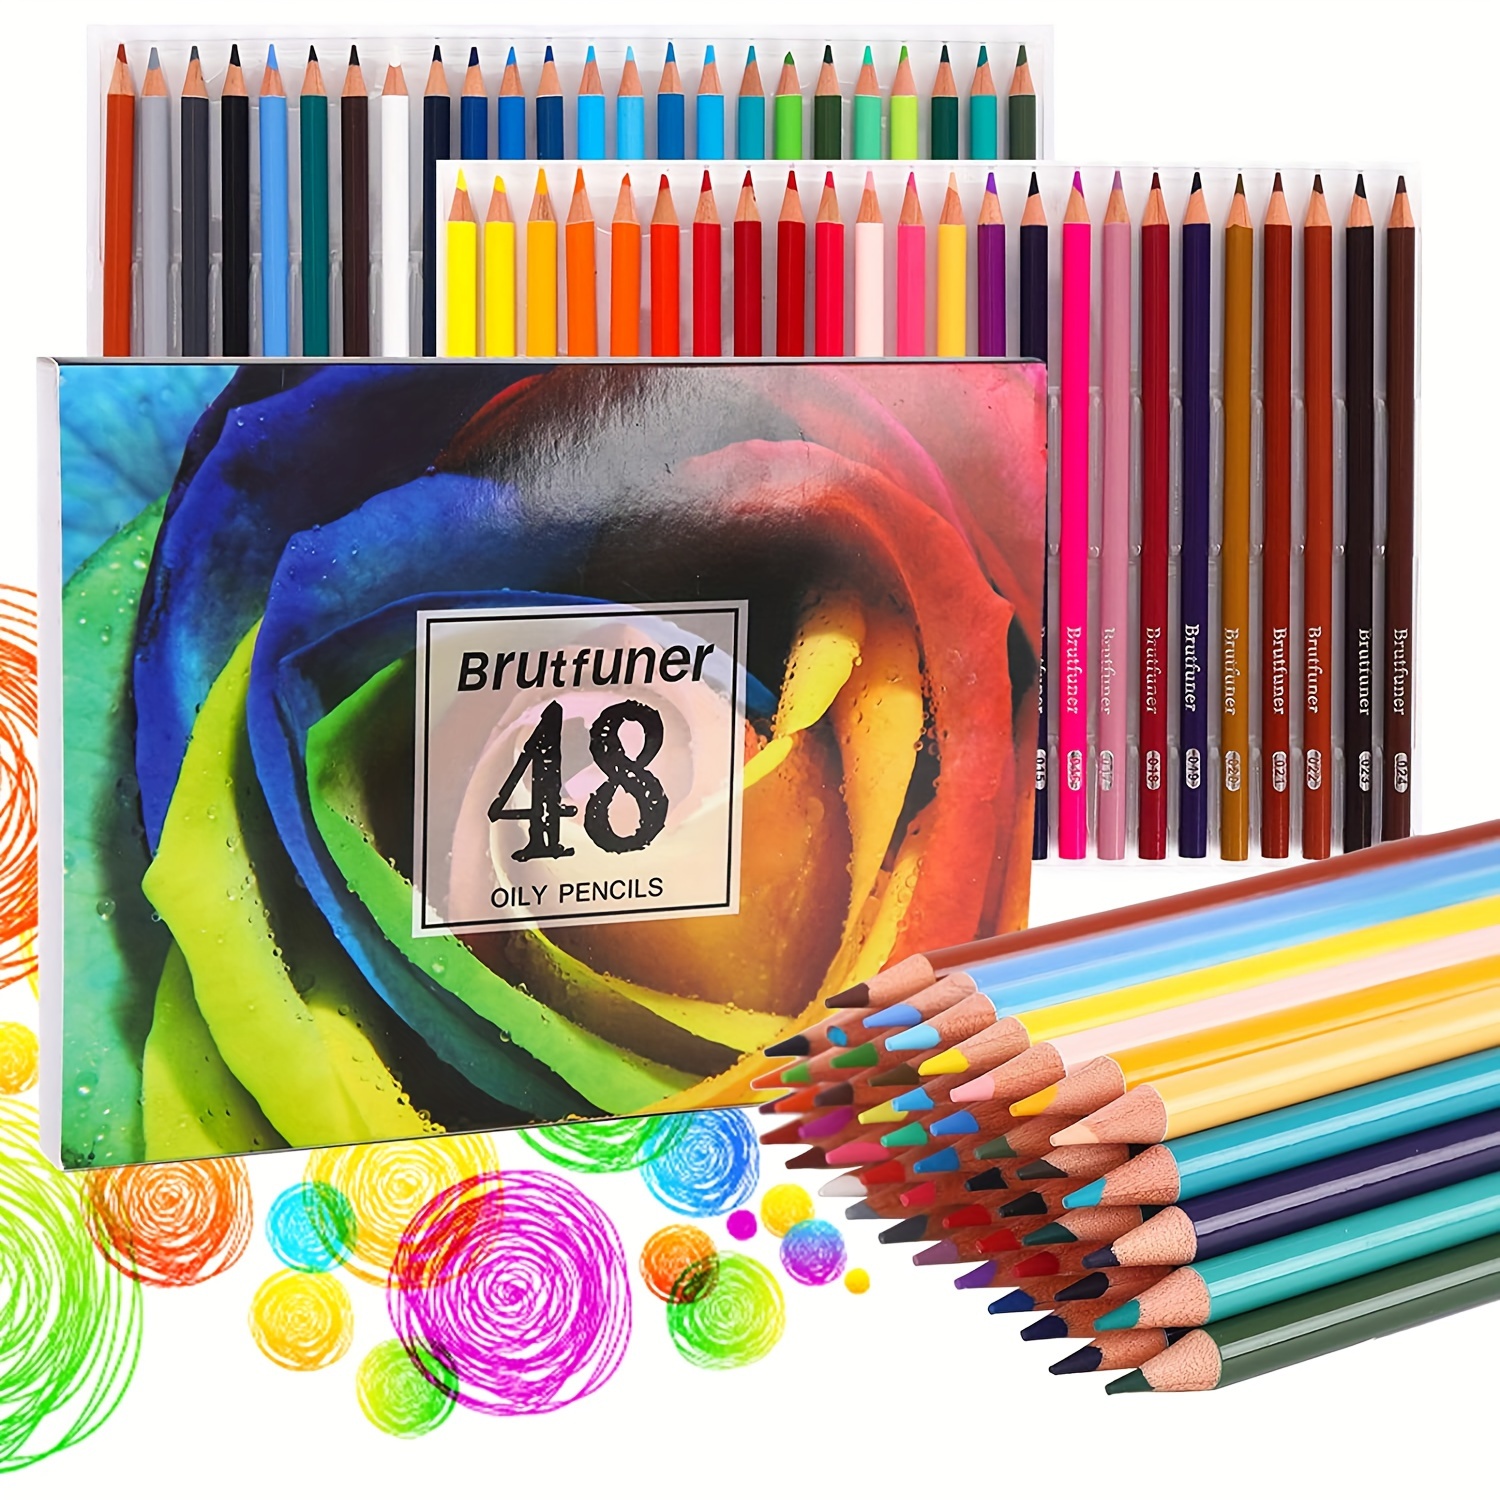 48 Colored Pencils, Color Pencils for Adult Coloring Book, Artist